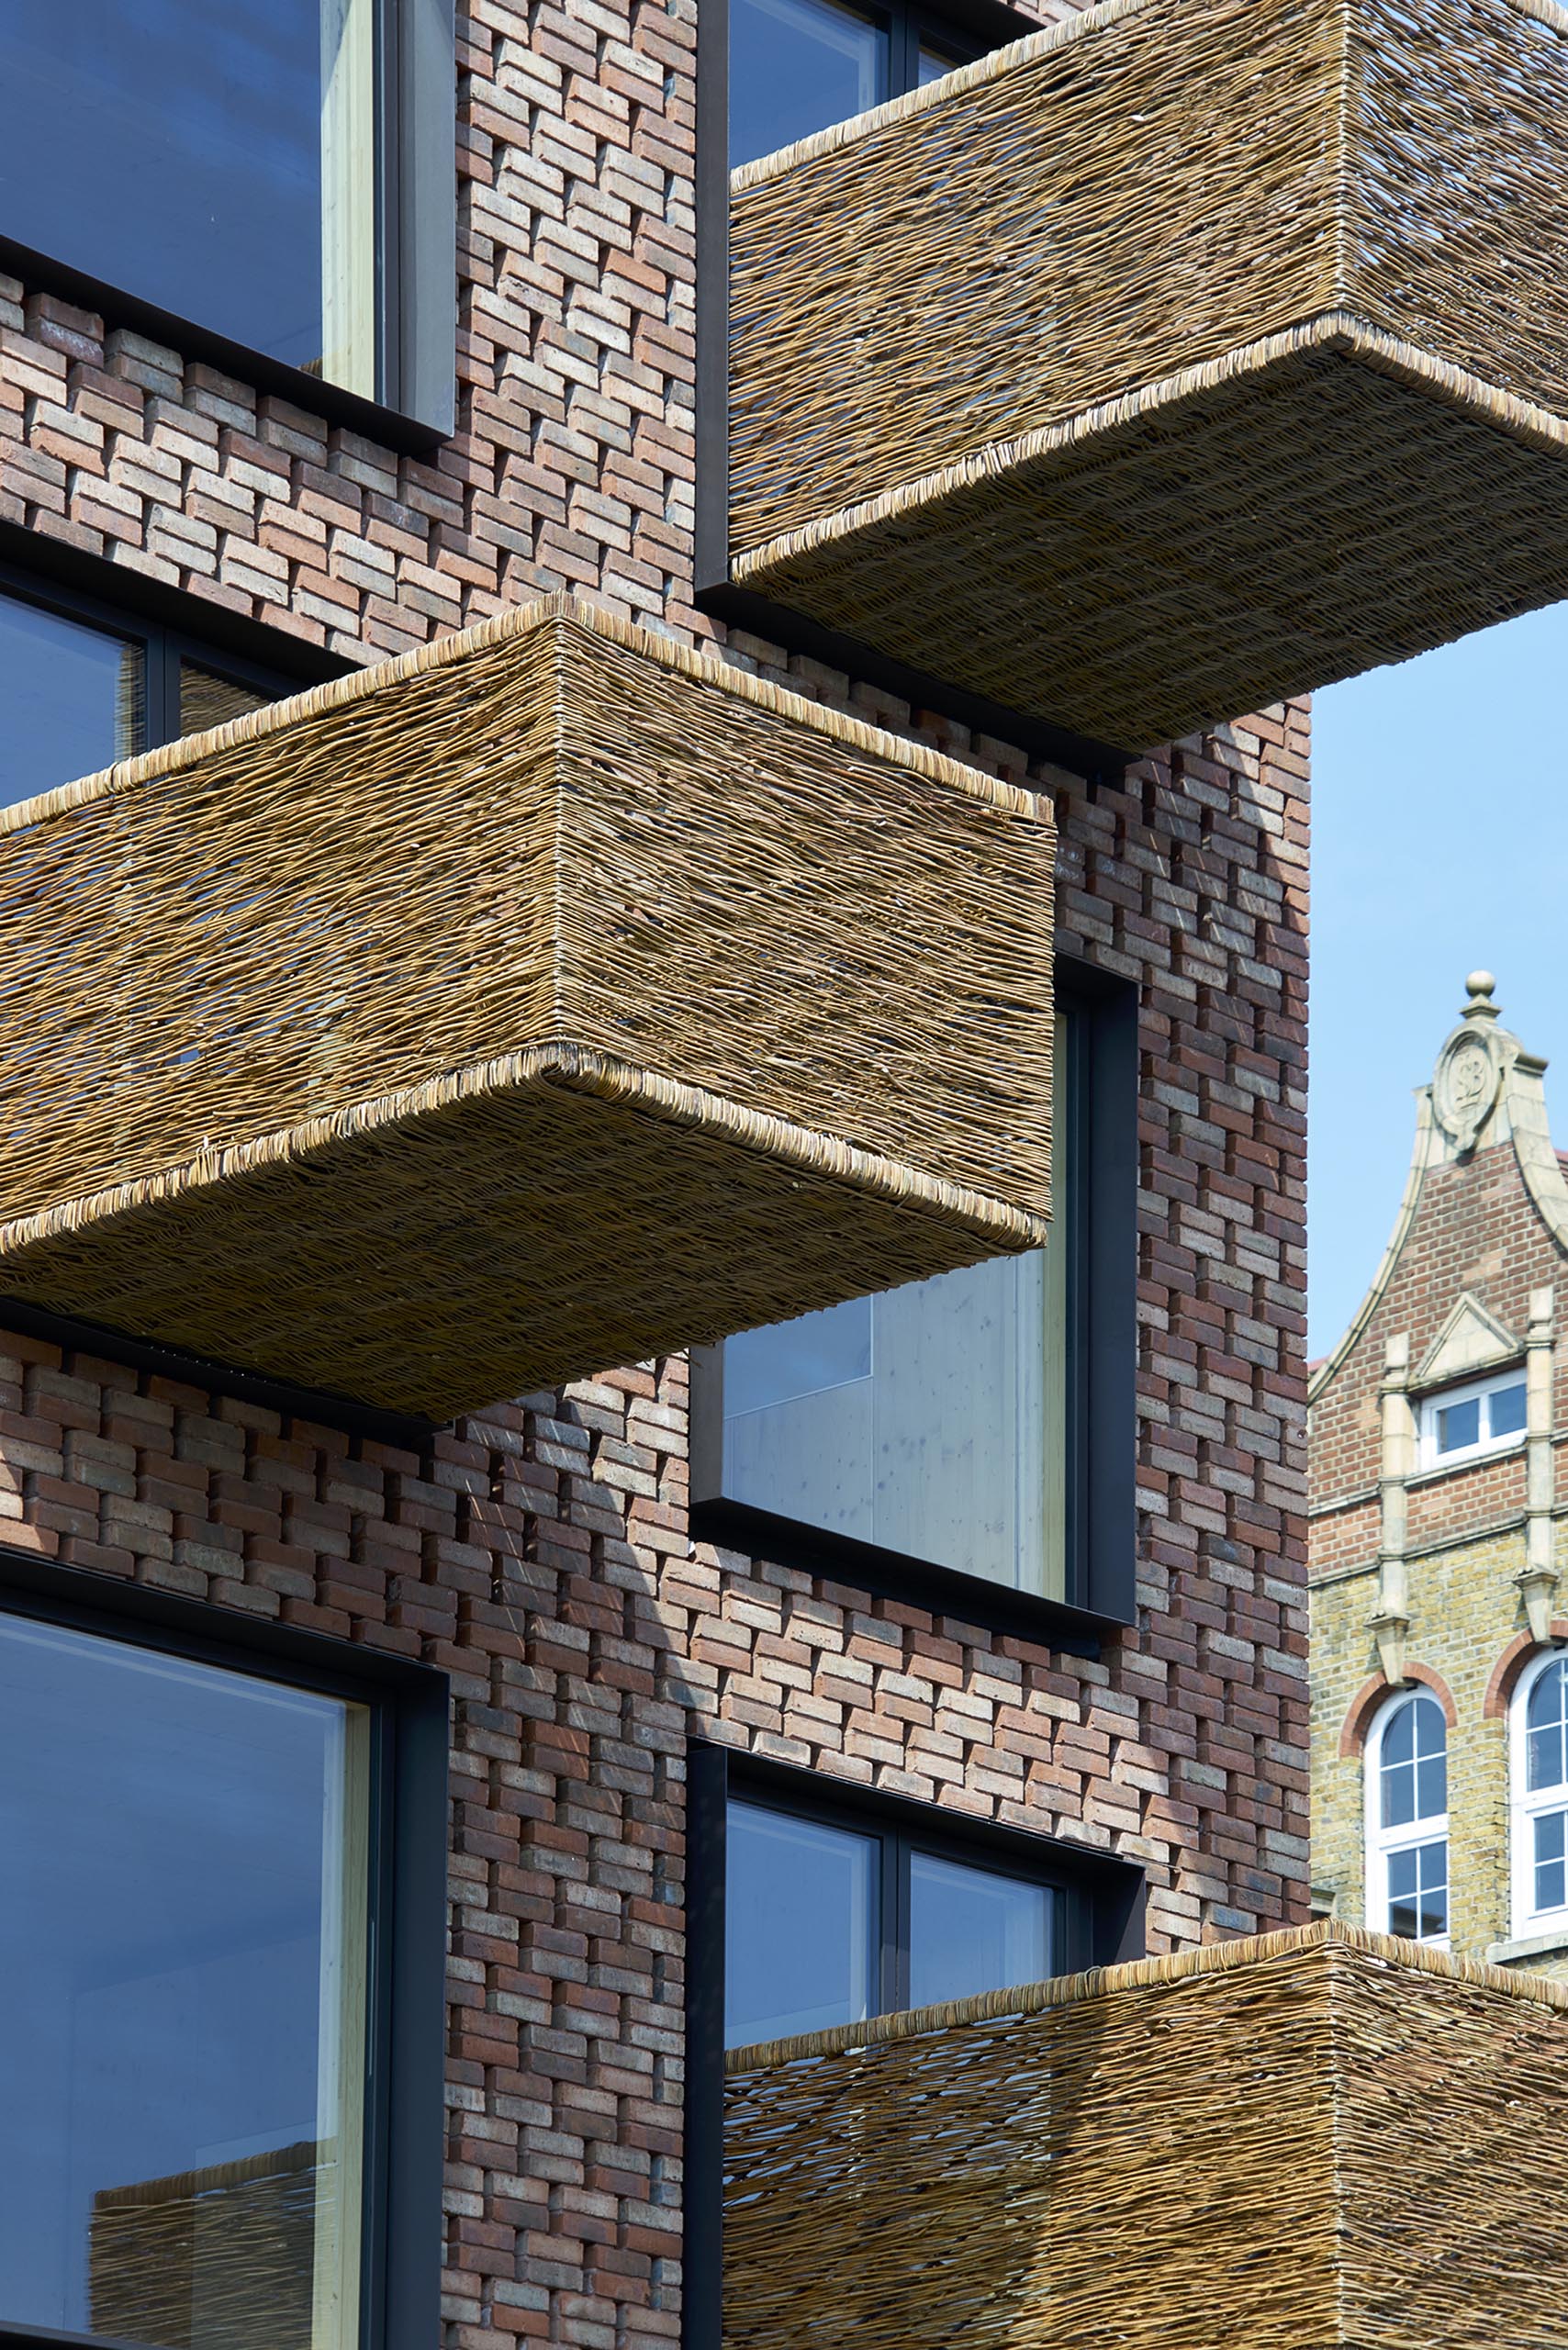 Woven wicker balconies protrude from a brick apartment building.